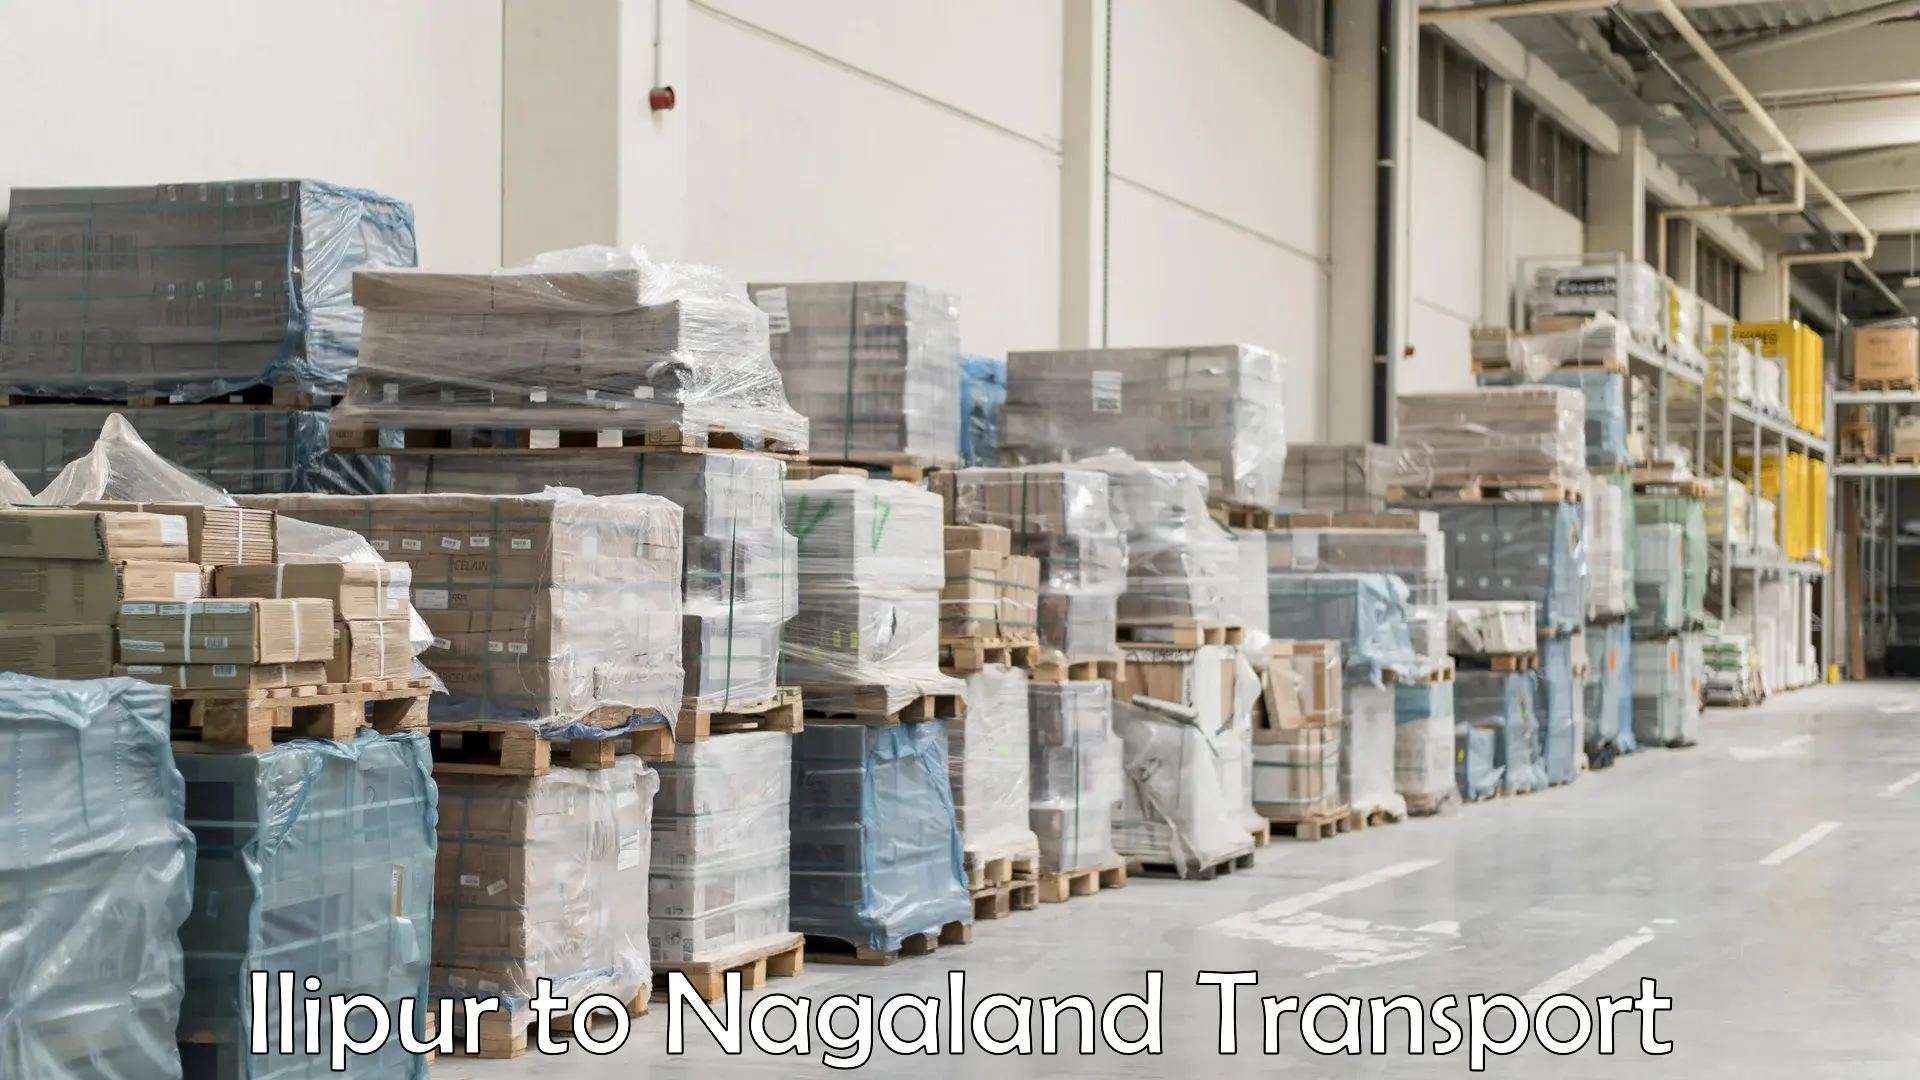 Daily parcel service transport Ilipur to Nagaland